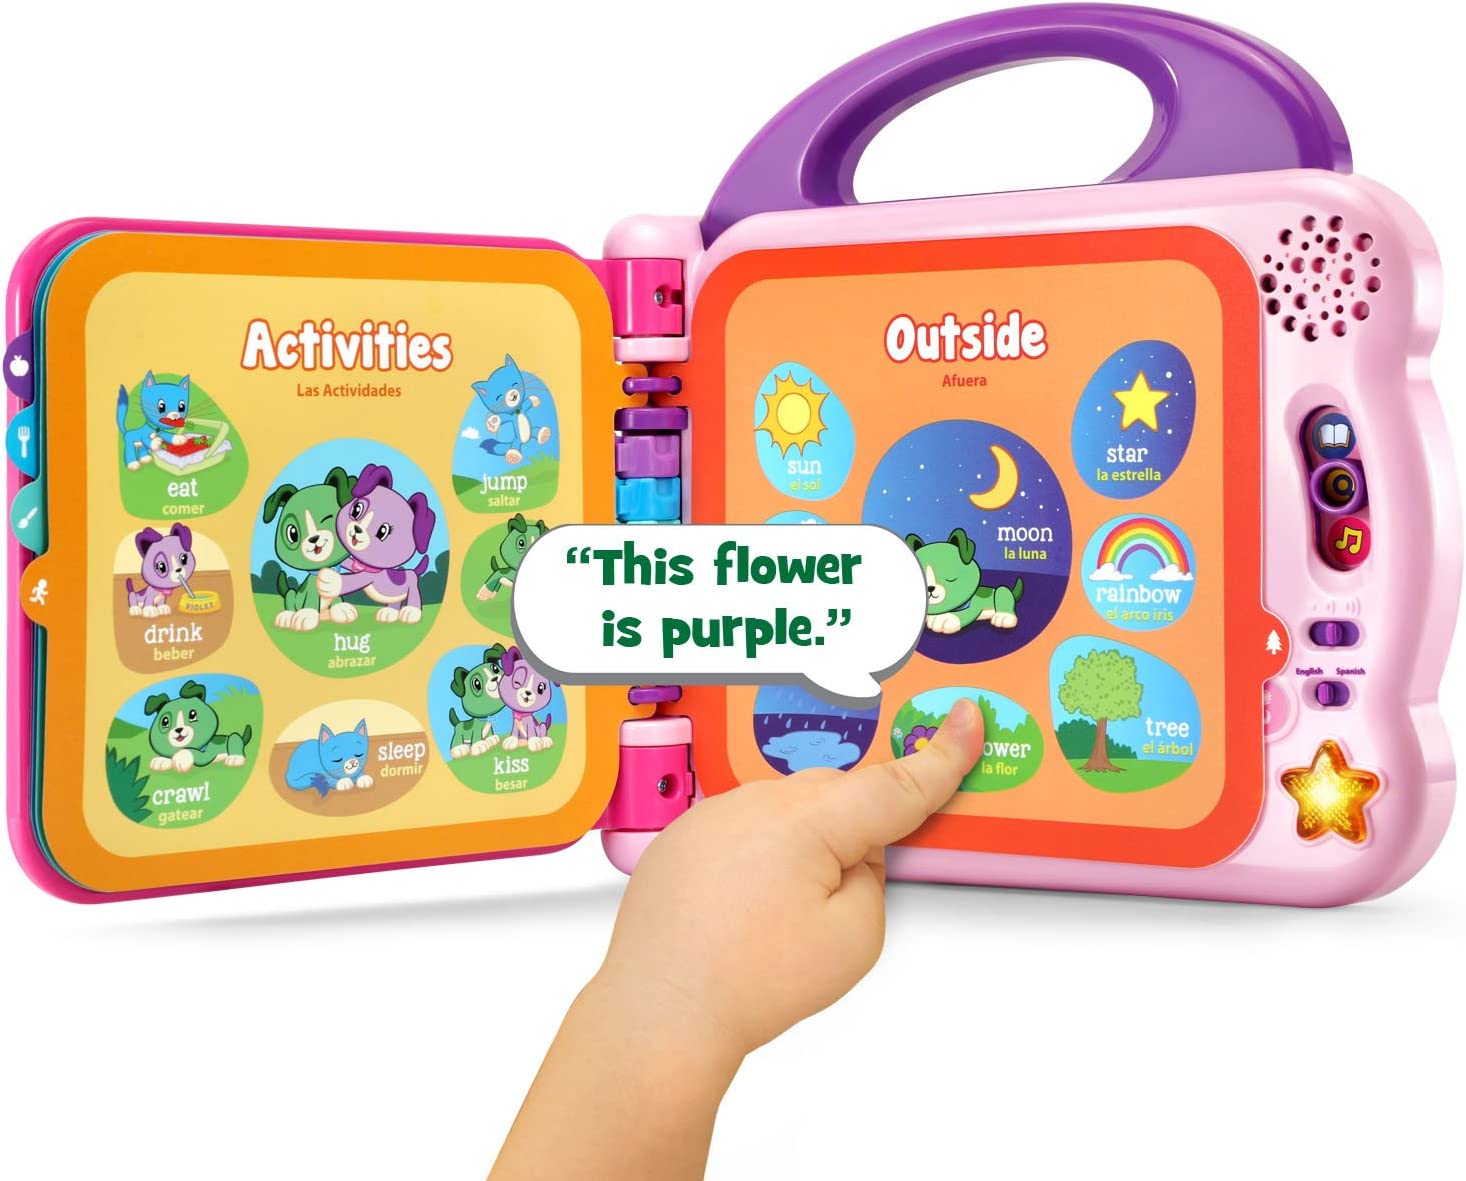 LeapFrog Spin and Sing Alphabet Zoo, Pink & Scout and Violet 100 Words Book, Purple